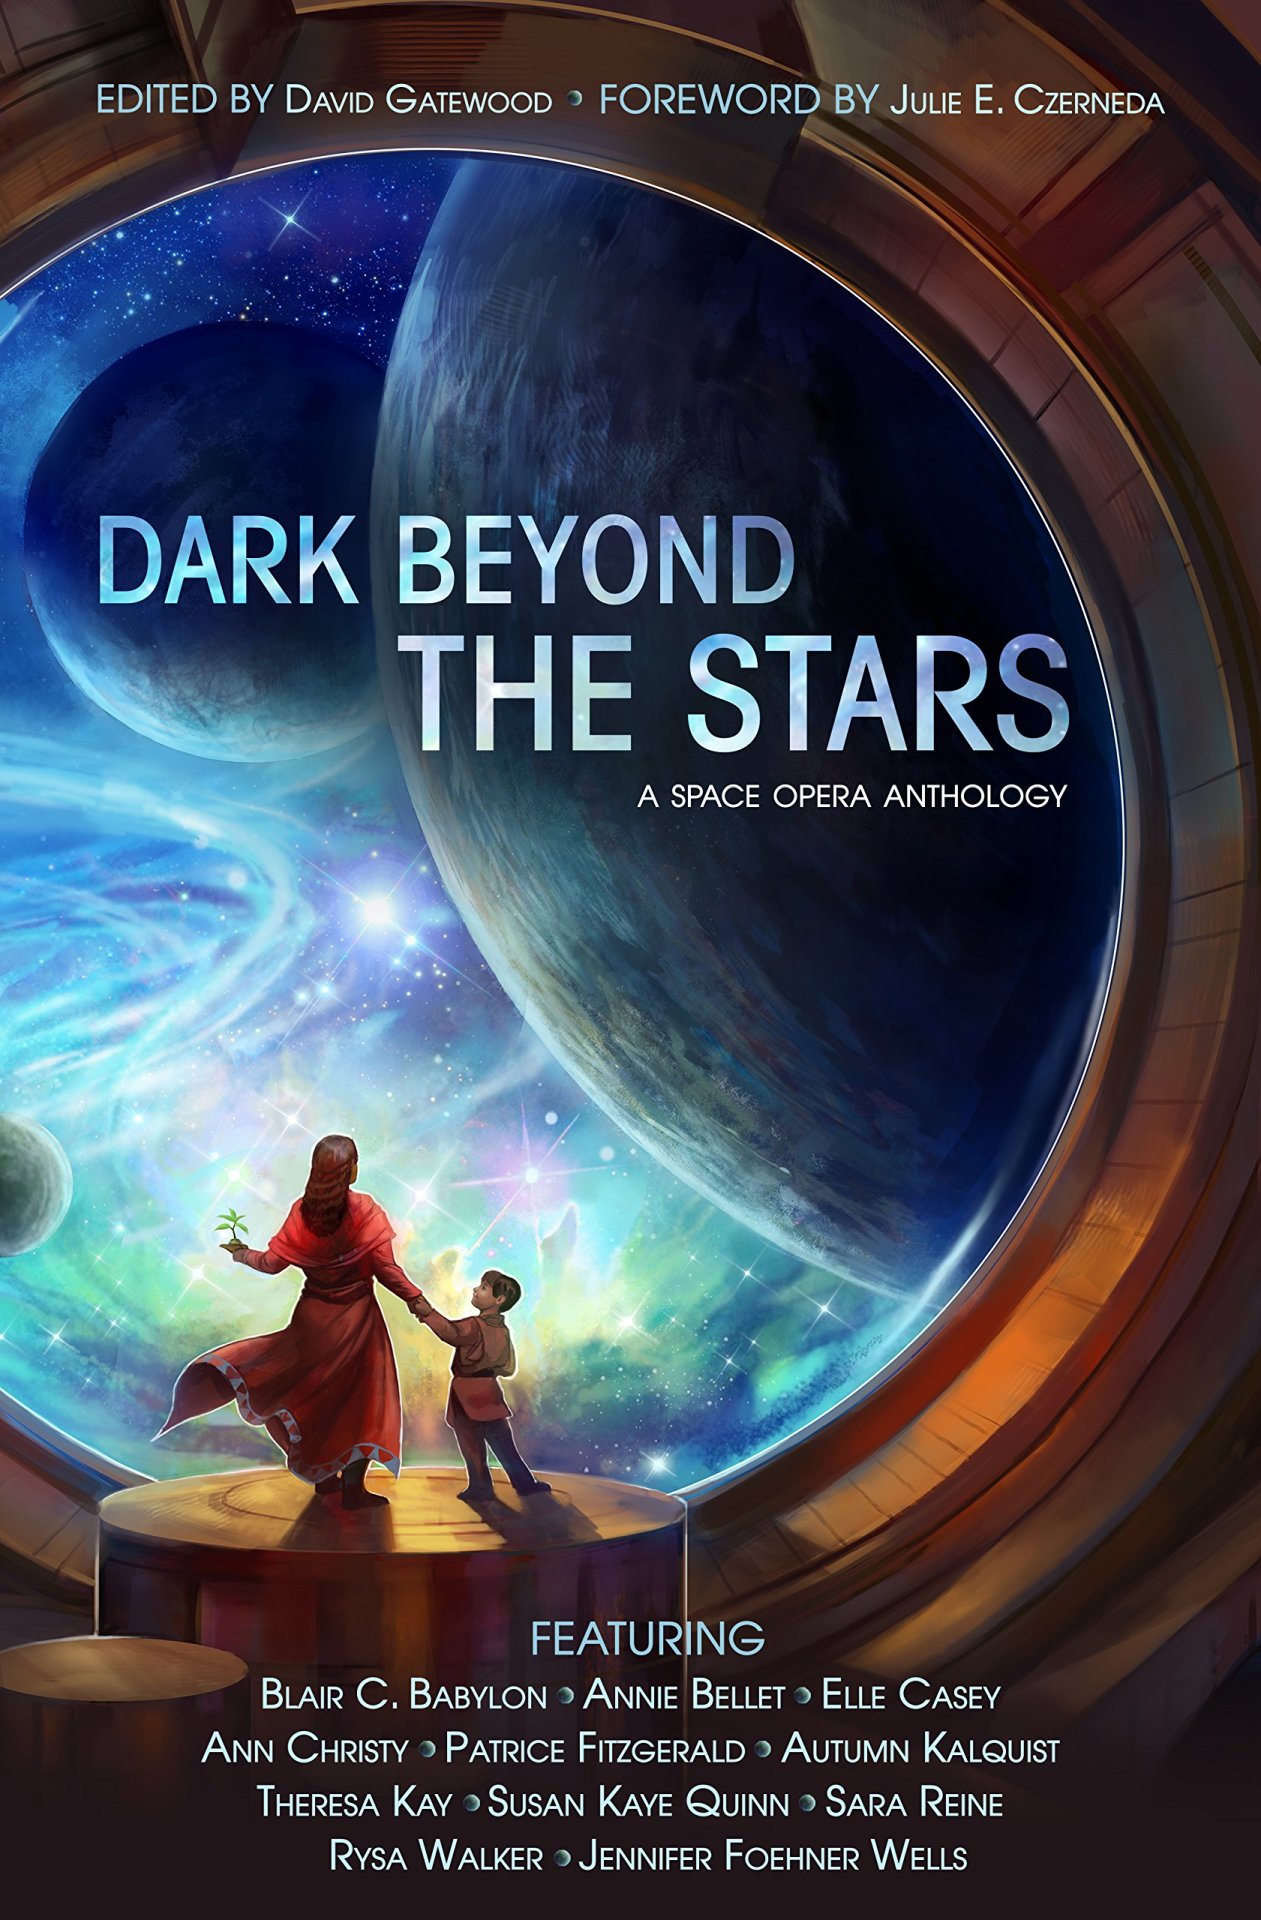 Finished #reading: Dark Beyond the Stars, ed. David Gatewood.
A collection of science fiction short stories by female writers. As you’d expect from a multiple-author anthology, the standard varies, but most of the stories were reasonably interesting...